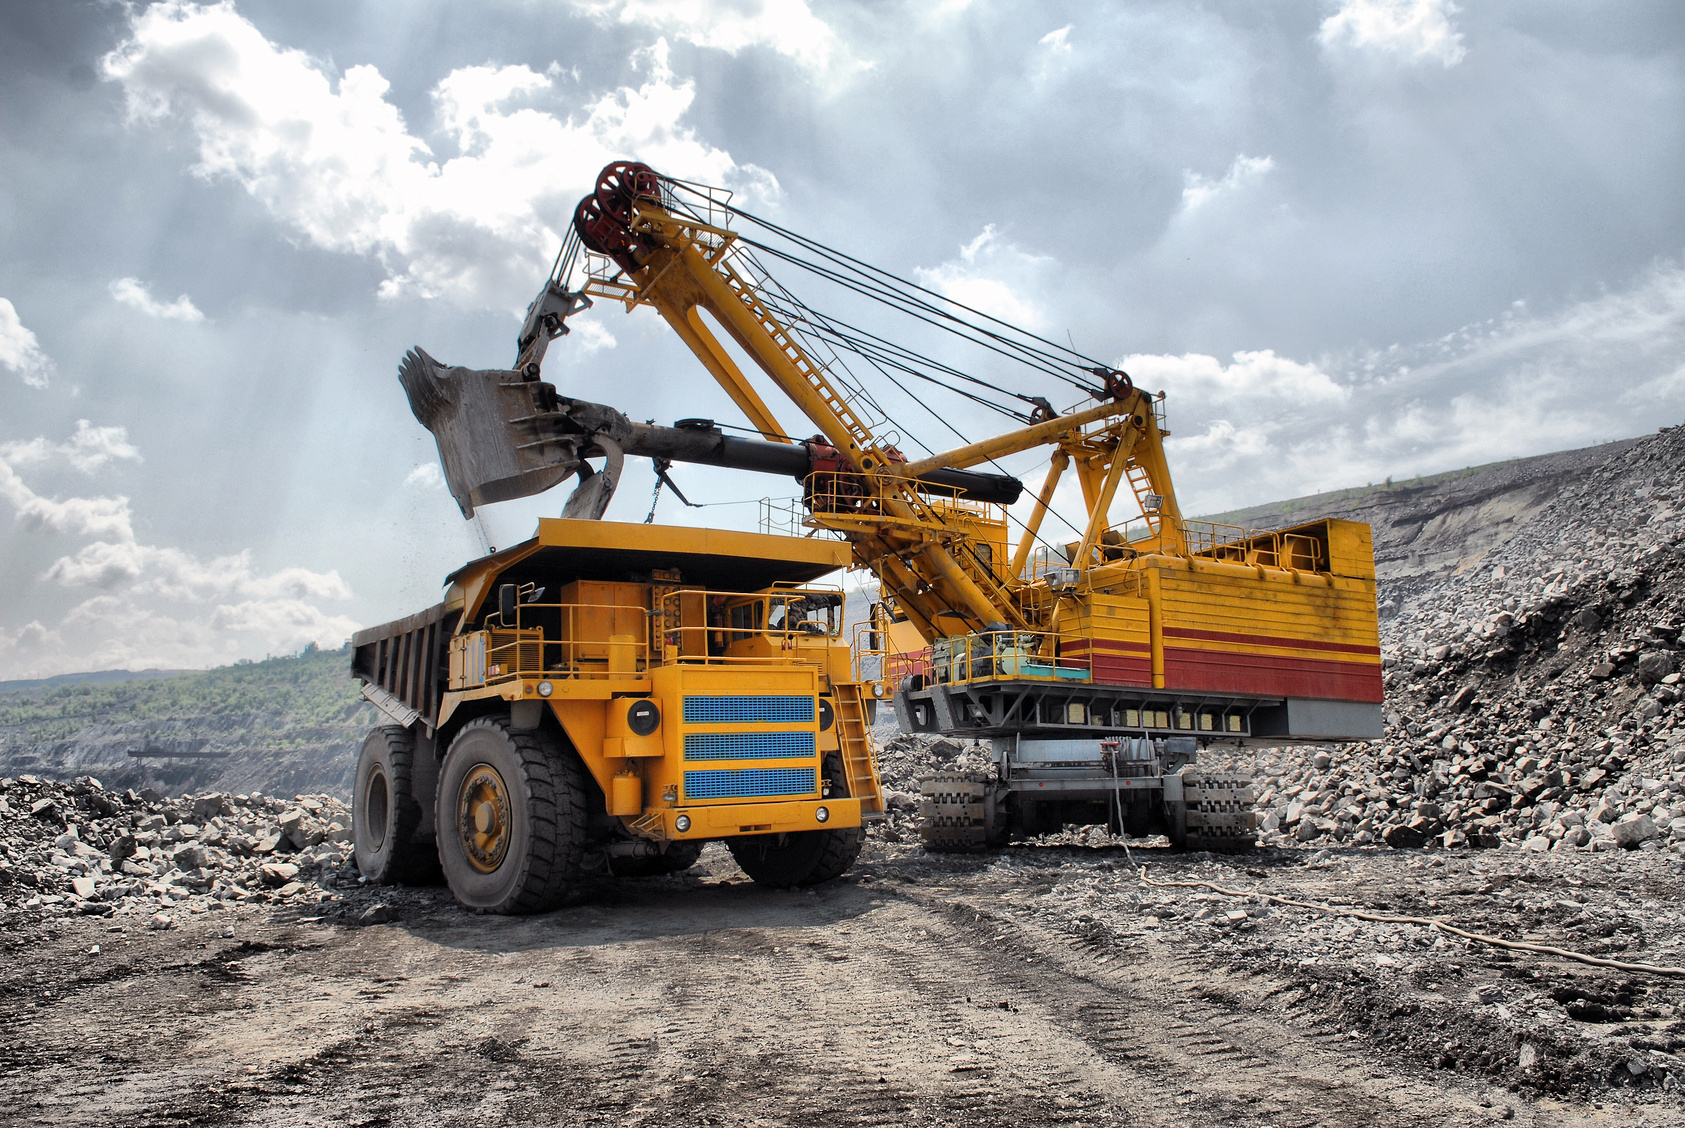 Truck and excavator for the degradation abiotic raw materials